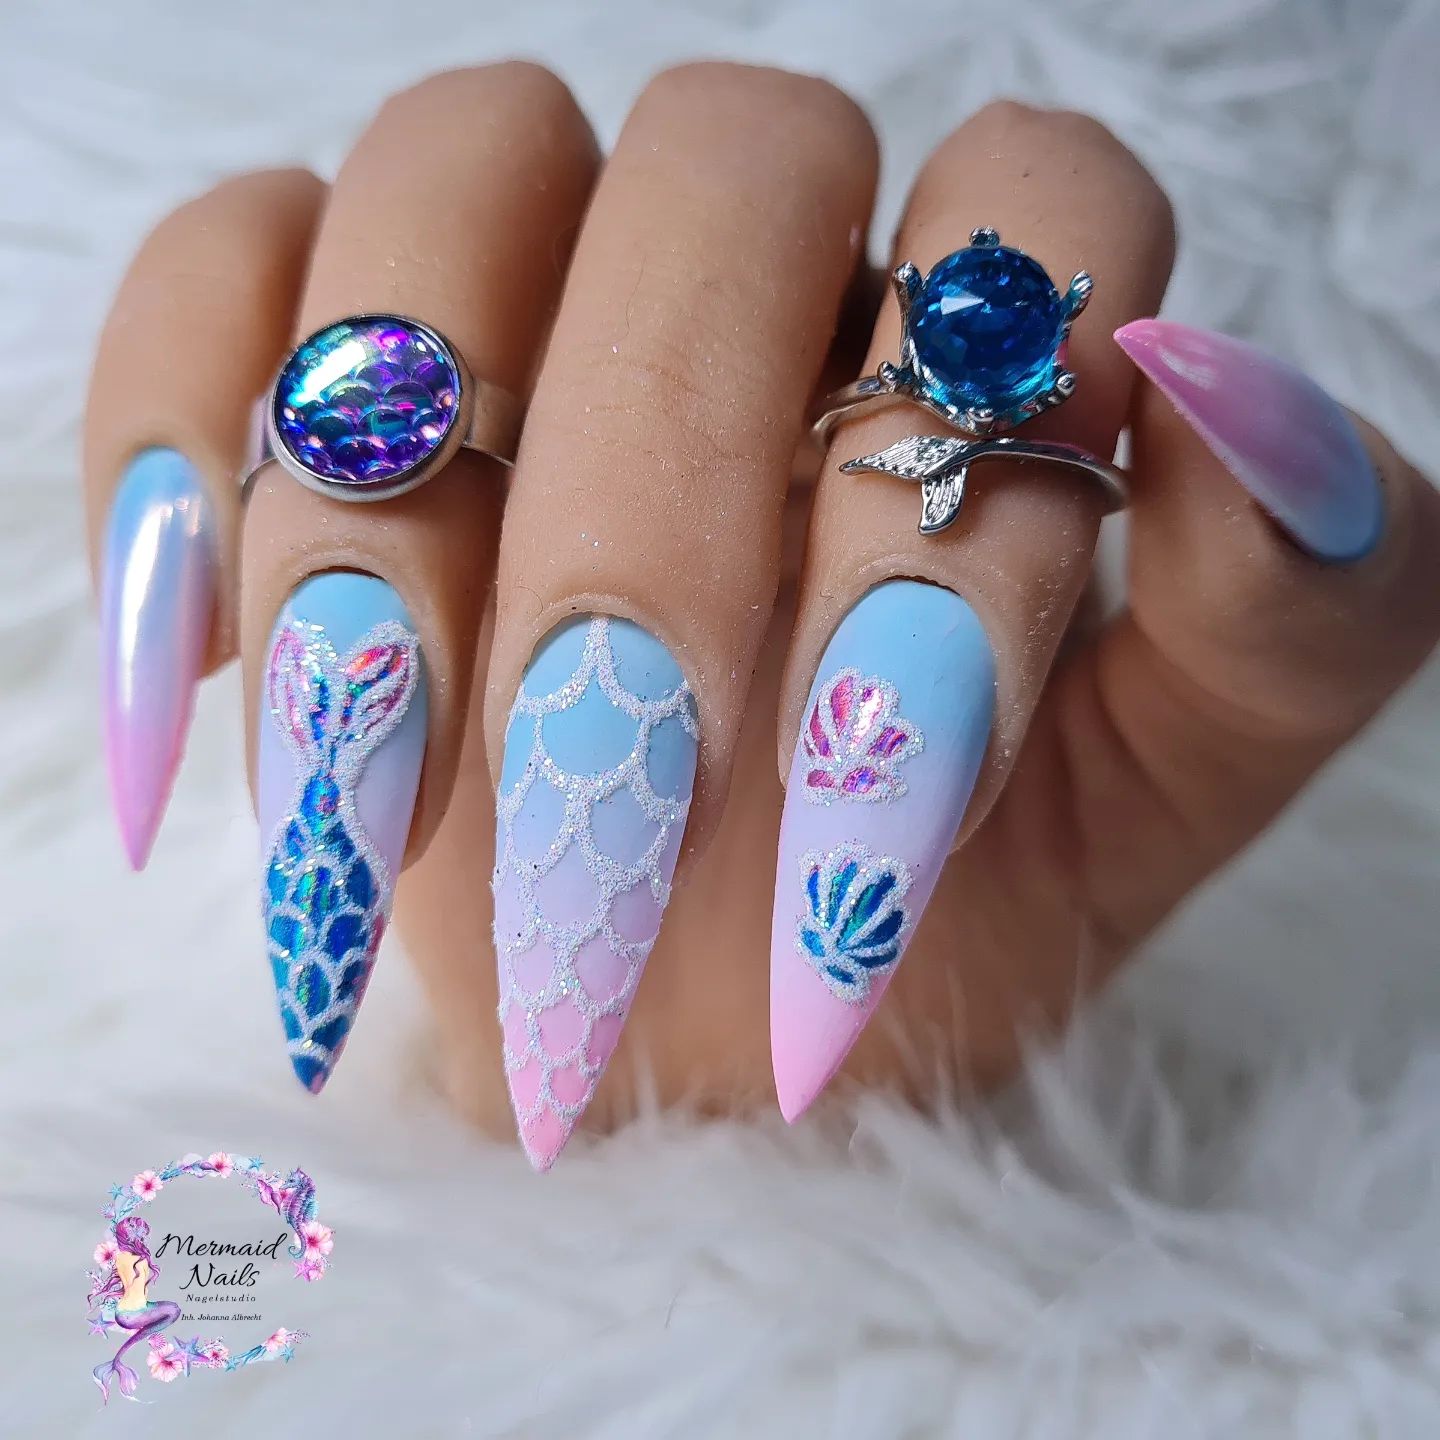 Long Blue-to-Pink Ombre Stiletto Nails with Mermaid Design